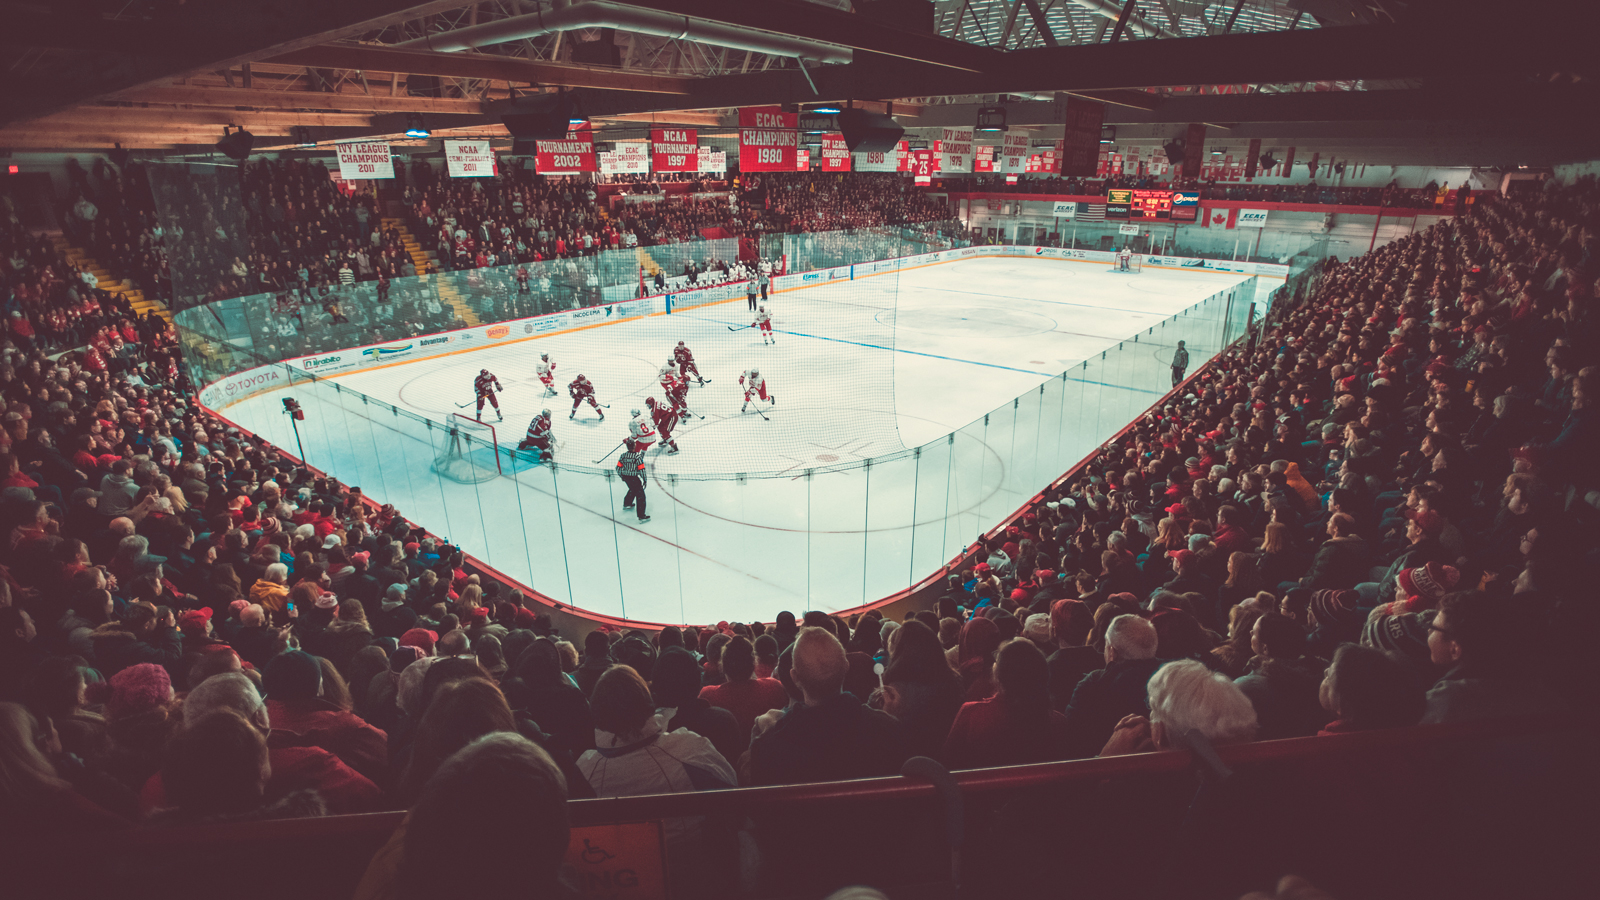 A men's ice hockey match between Cornell and Harvard at Lynah Rink at Cornell University